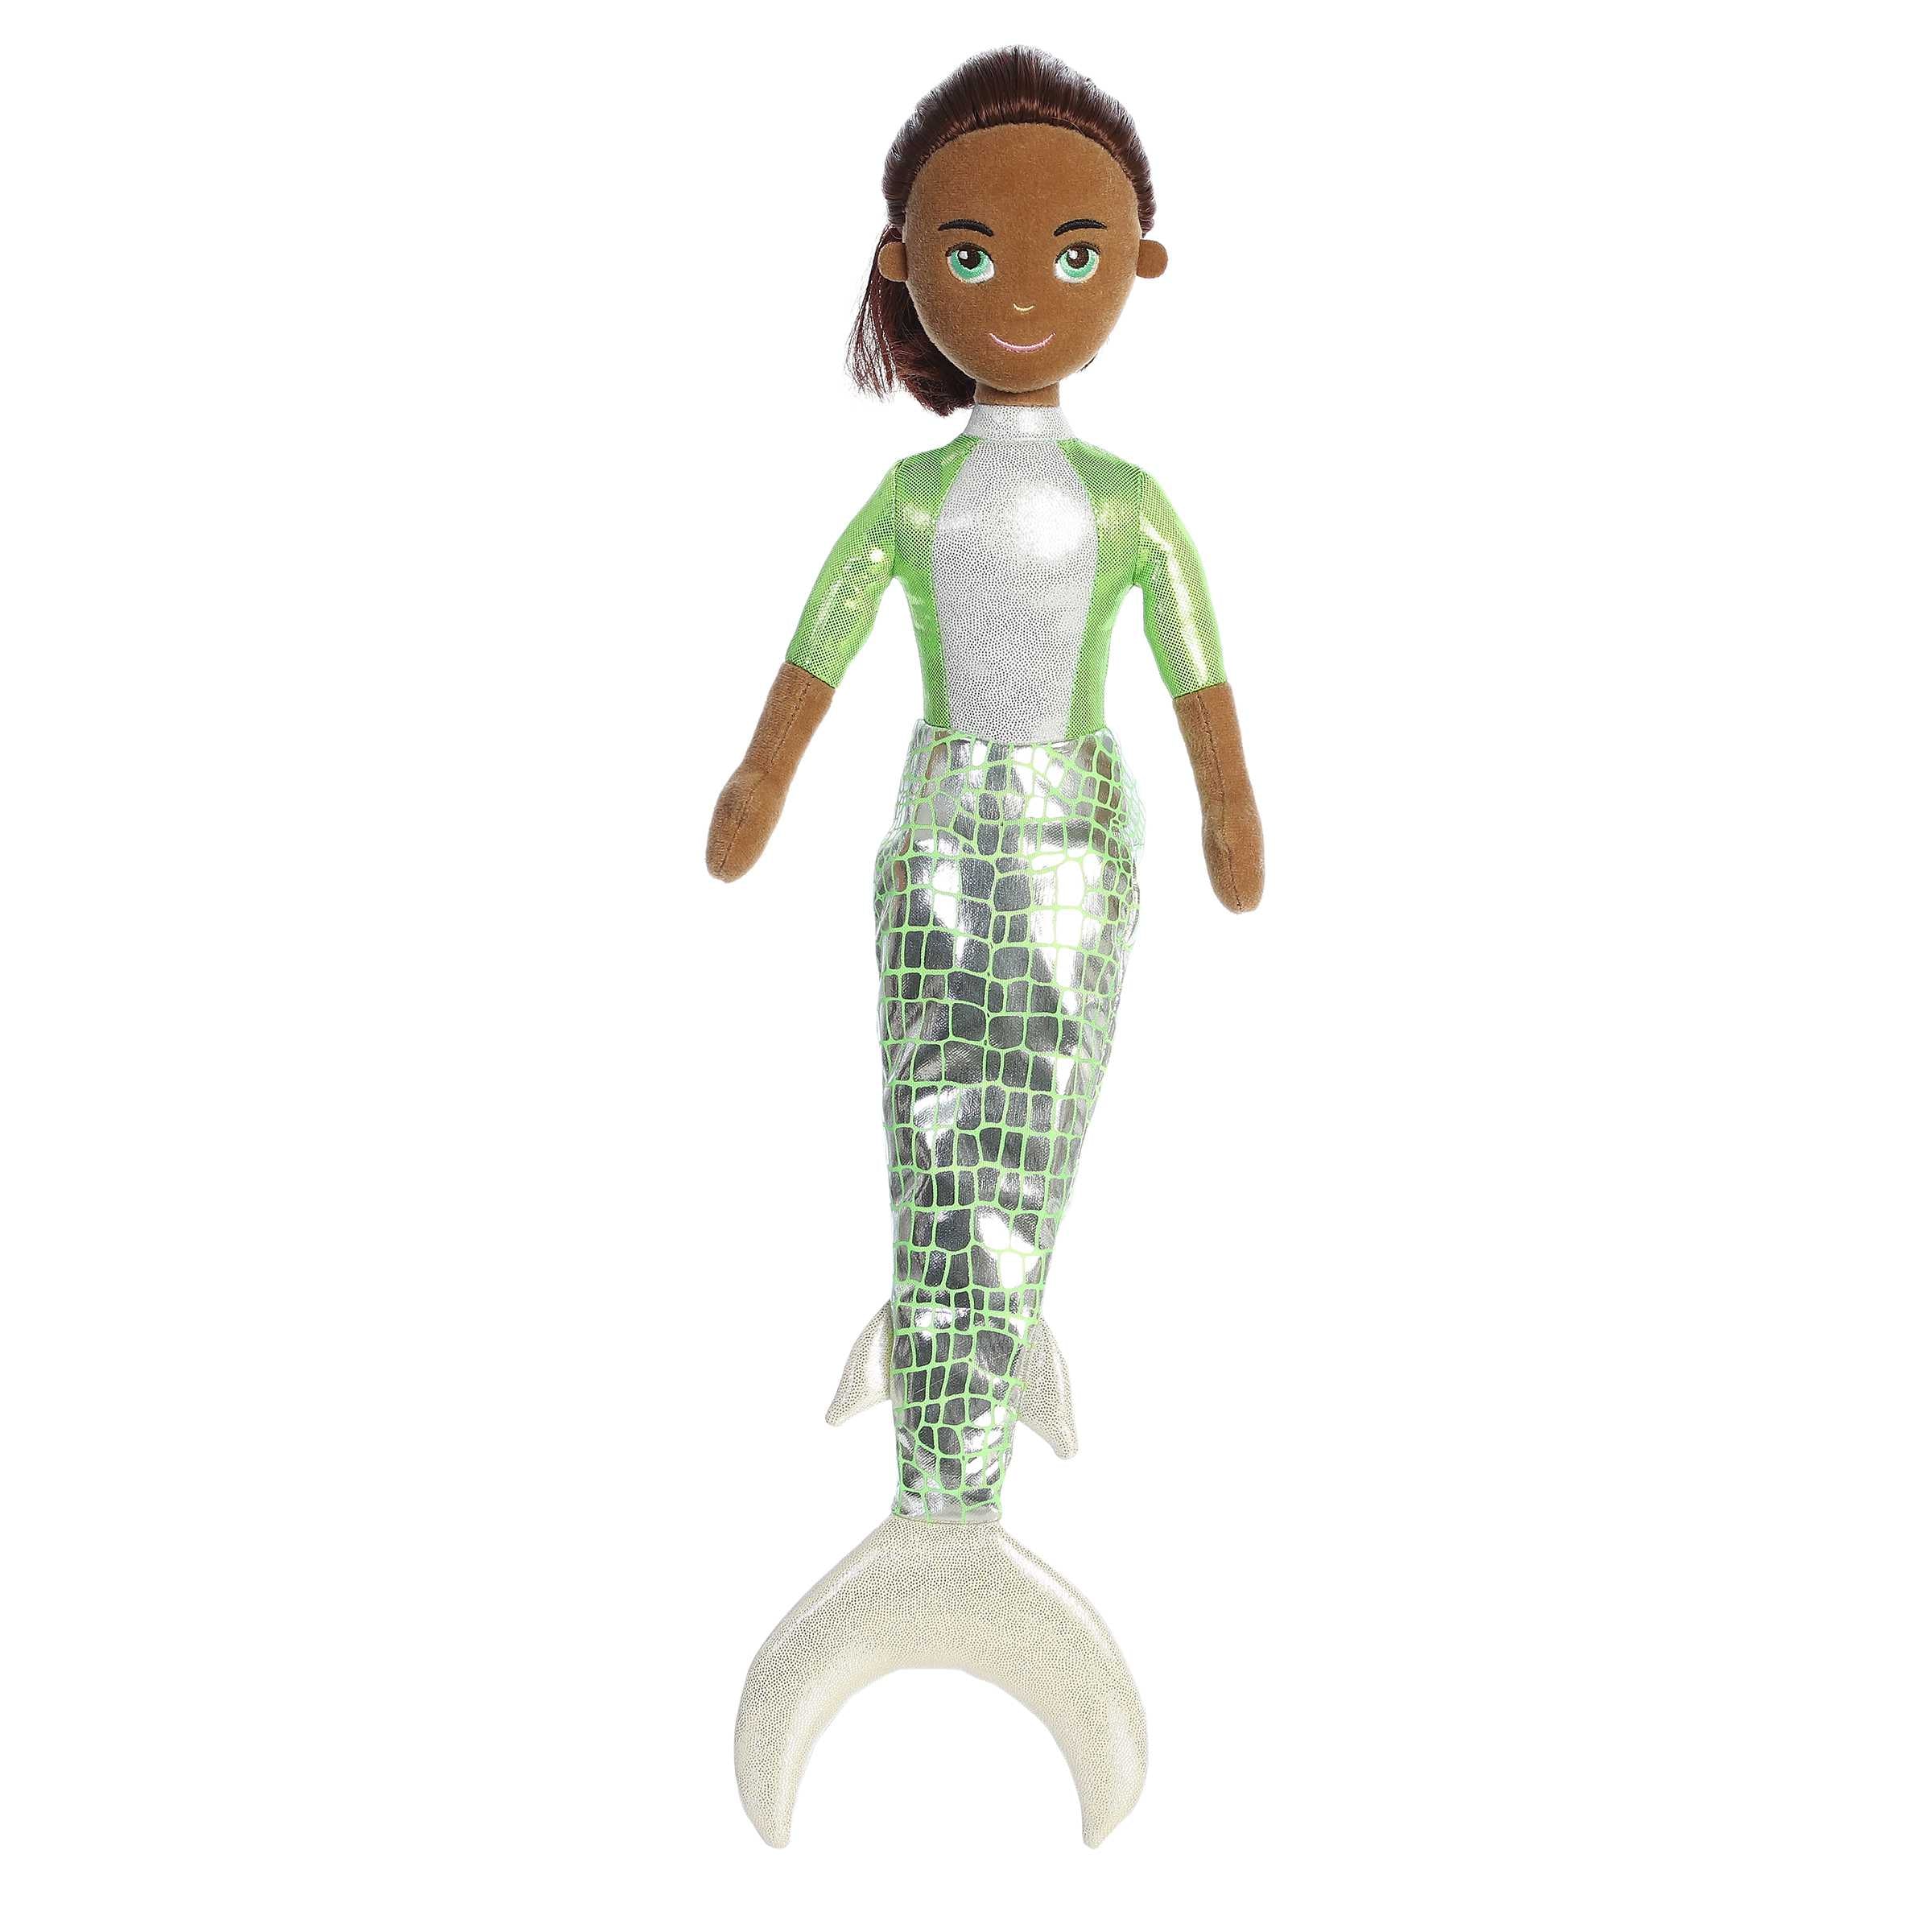 Jayden mermaid plush with a vibrant green tail and welcoming expression, ideal for play and collecting.